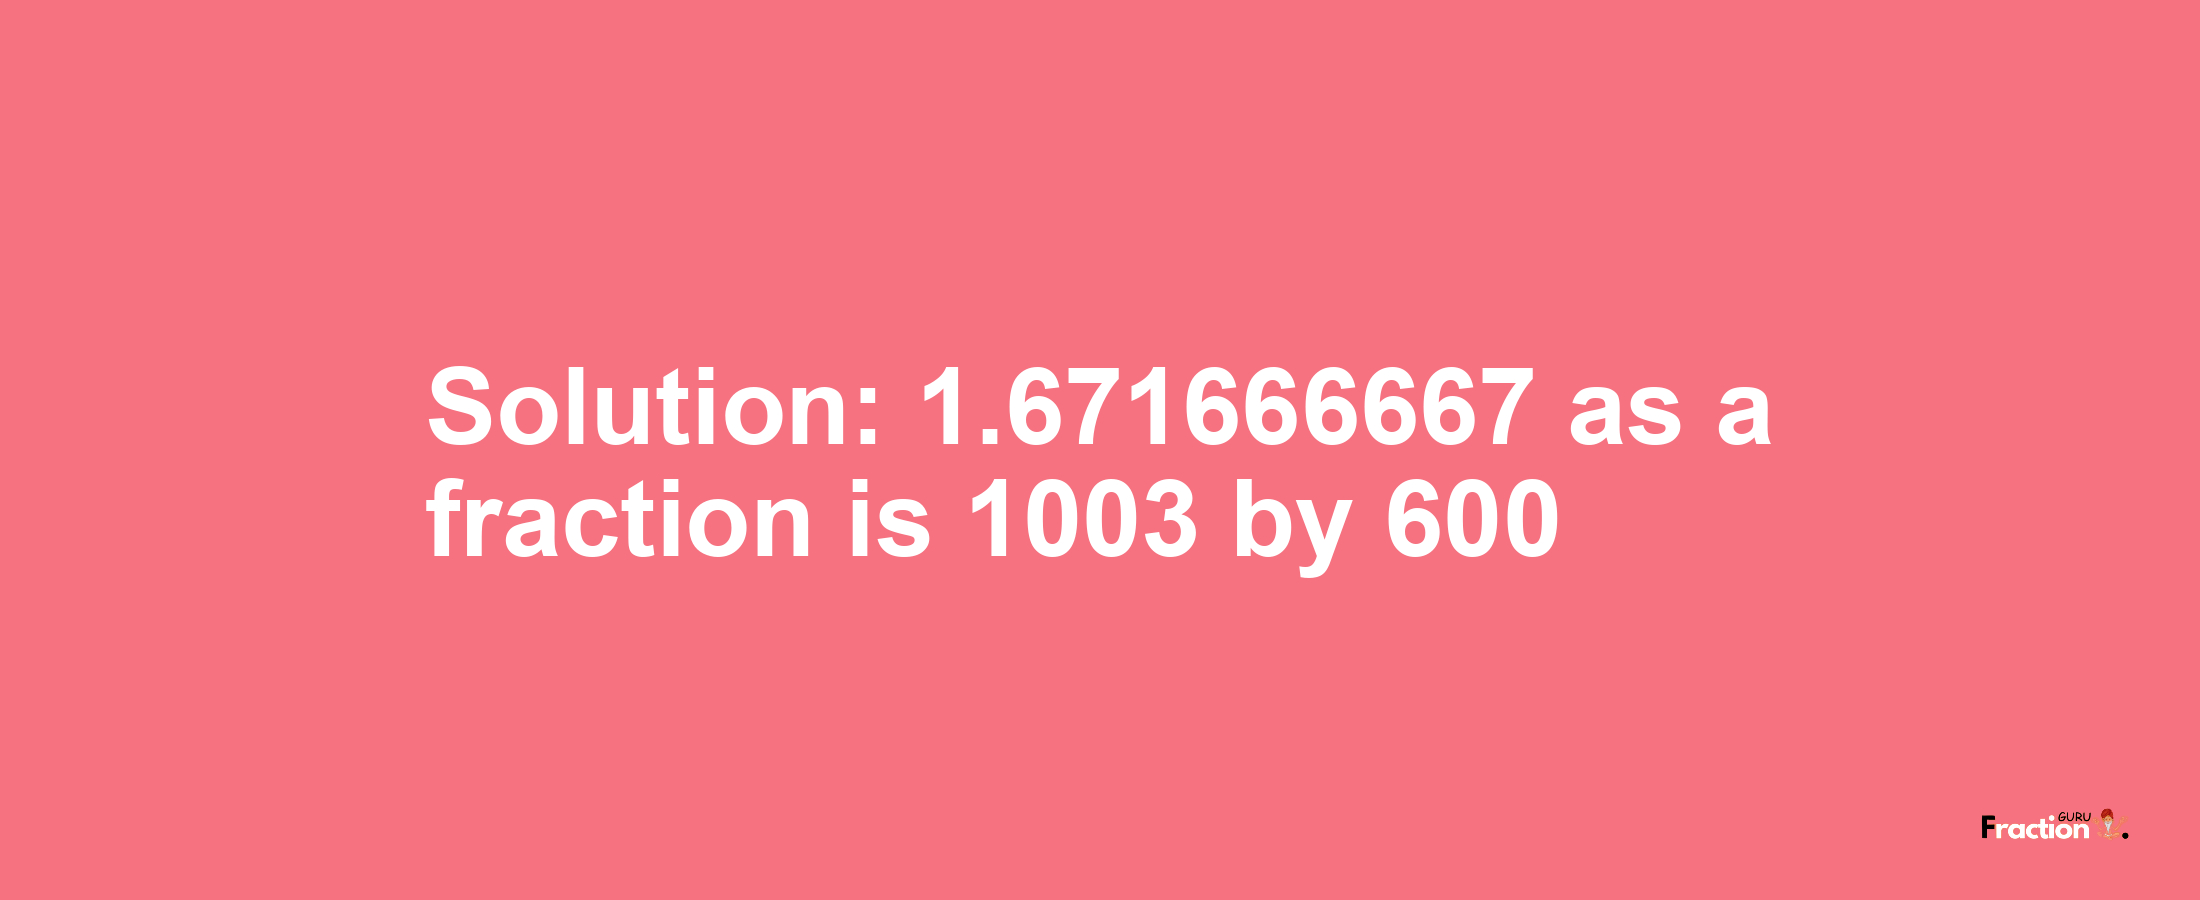 Solution:1.671666667 as a fraction is 1003/600